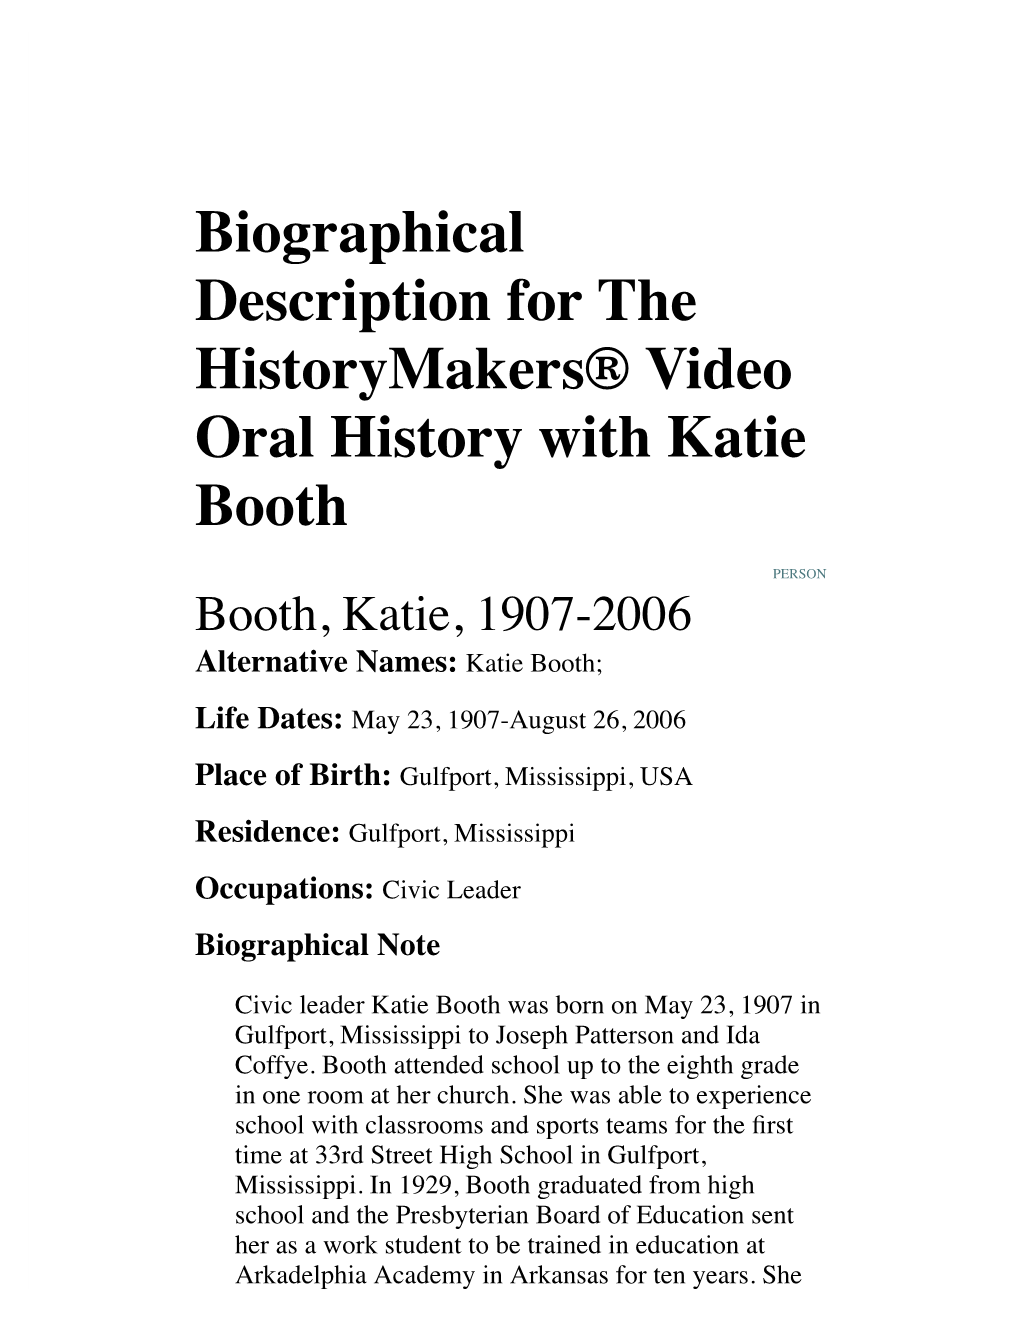 Biographical Description for the Historymakers® Video Oral History with Katie Booth